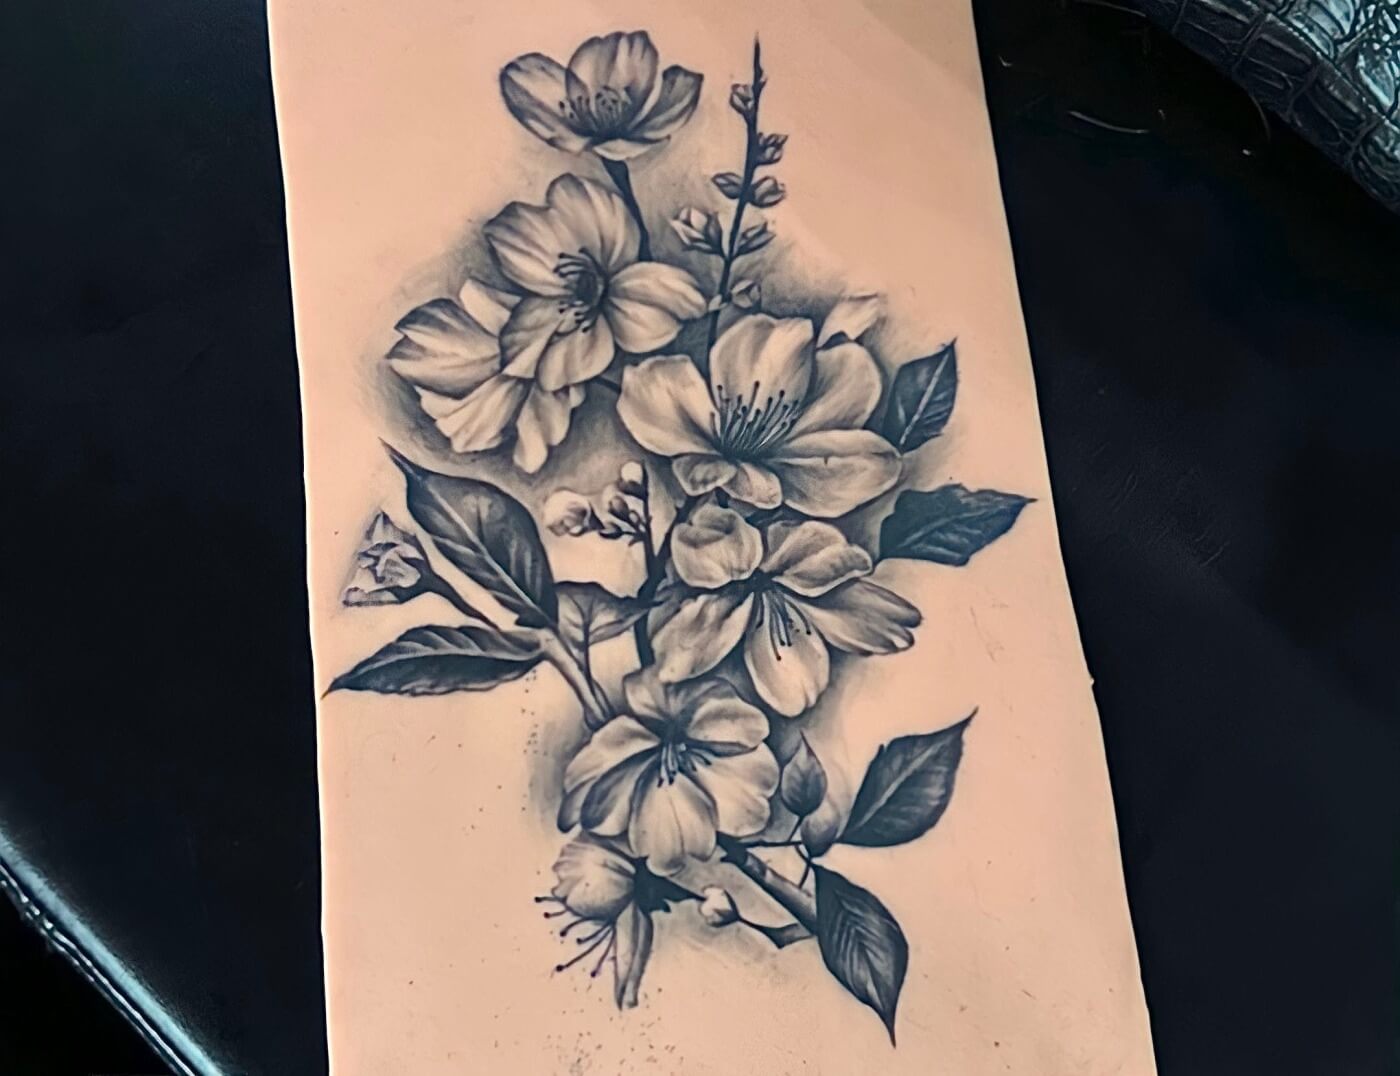 Check out this beautiful cover up Lotus... - Tattoo Technique | Facebook